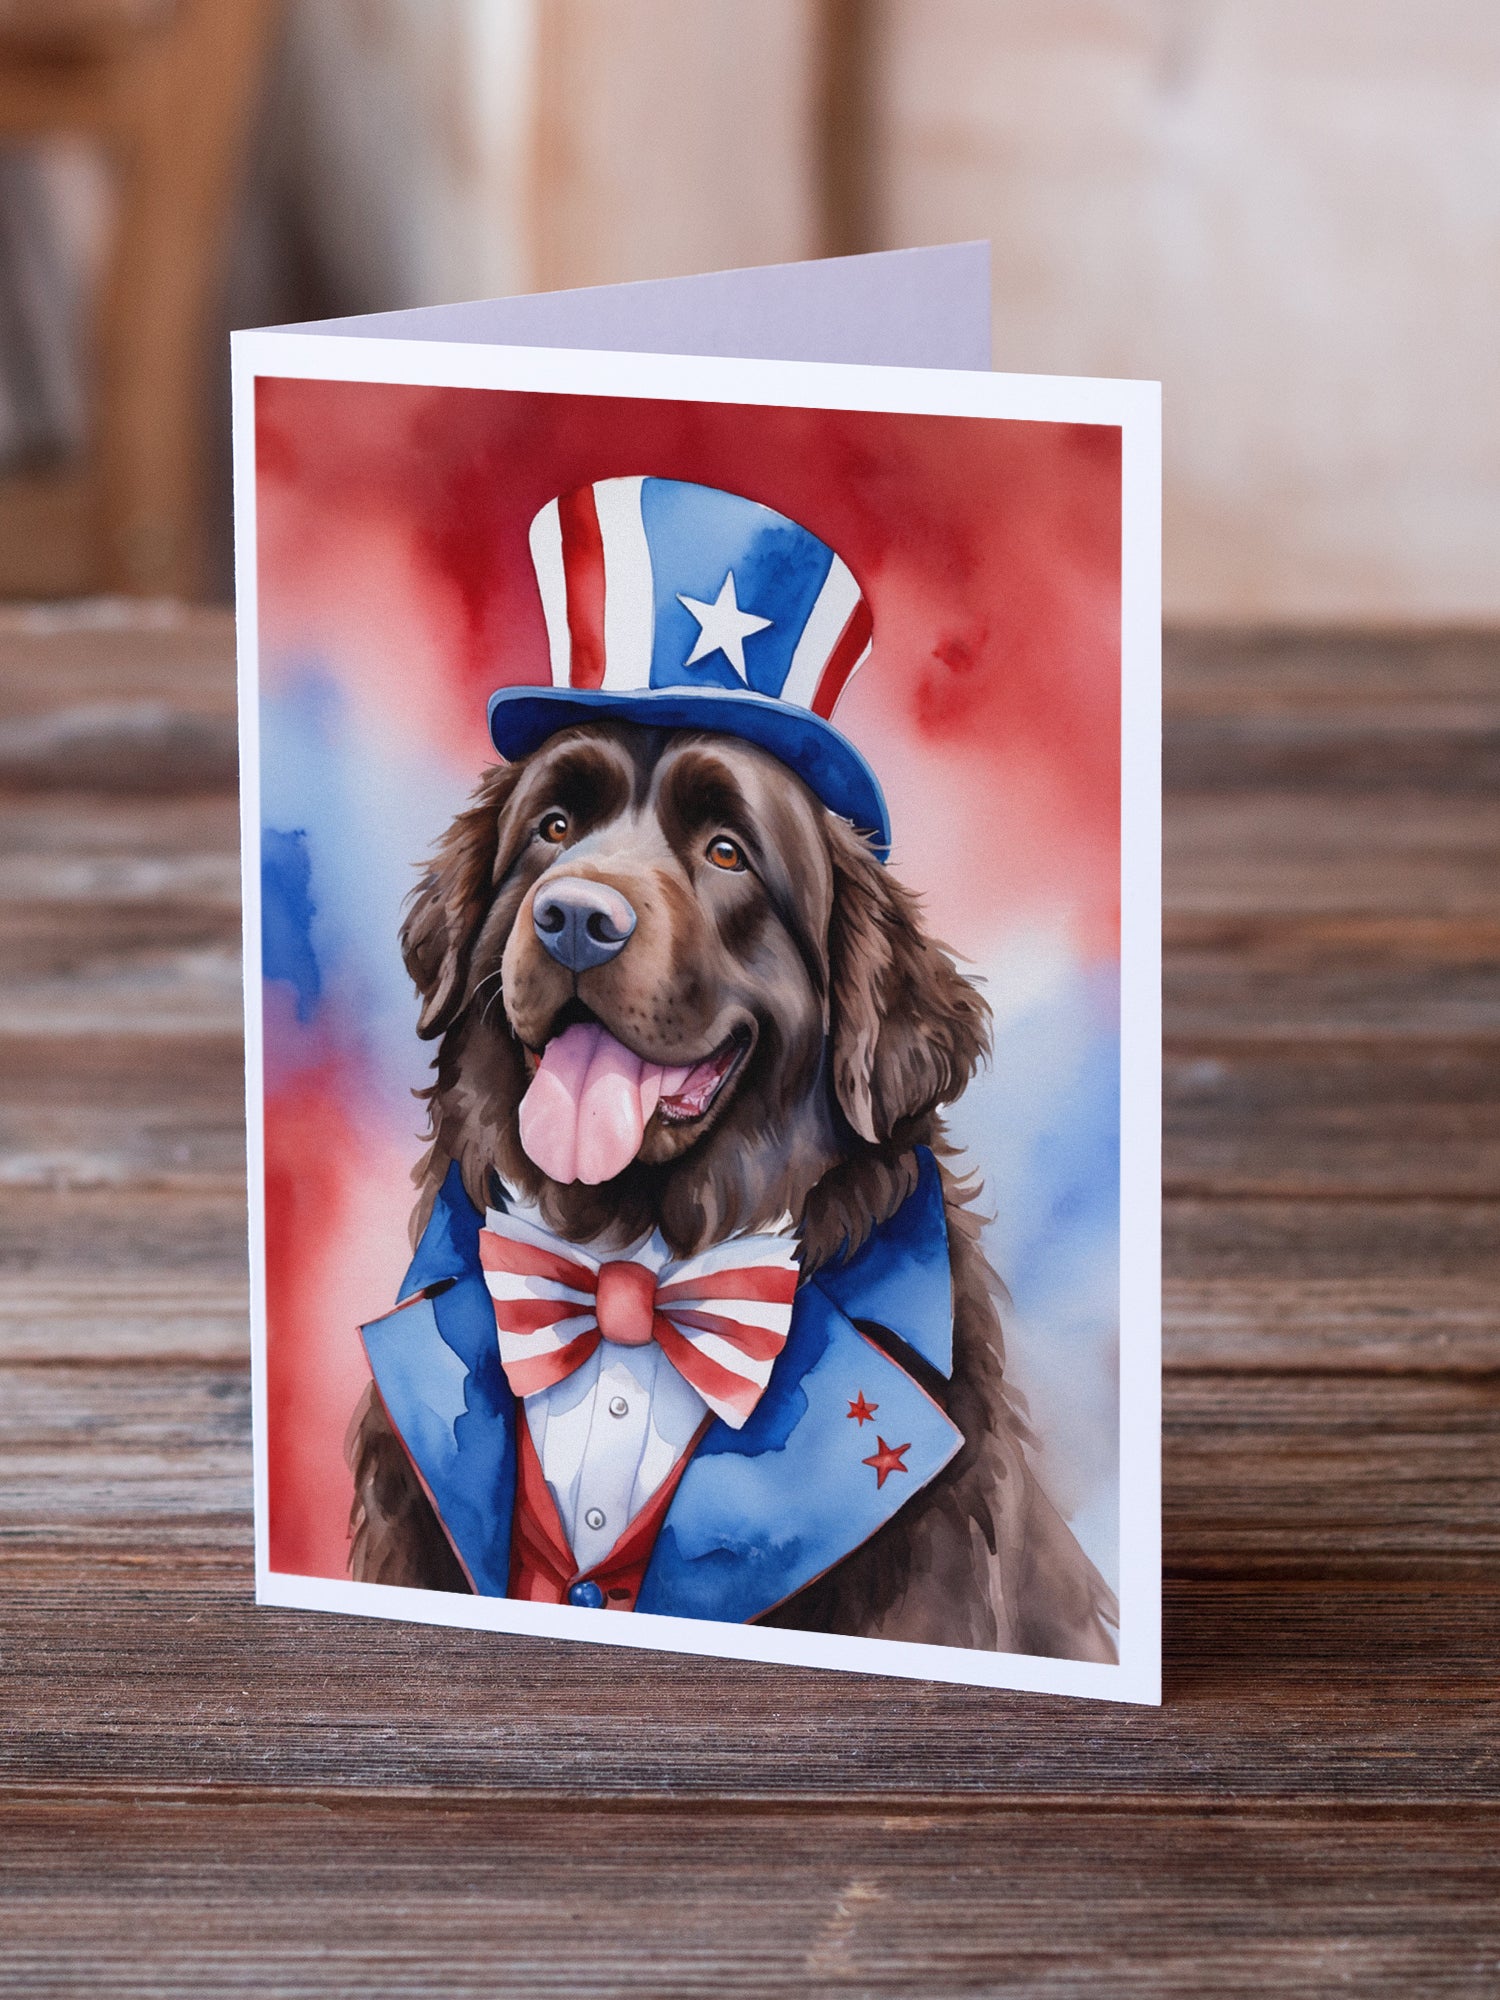 Buy this Newfoundland Patriotic American Greeting Cards Pack of 8